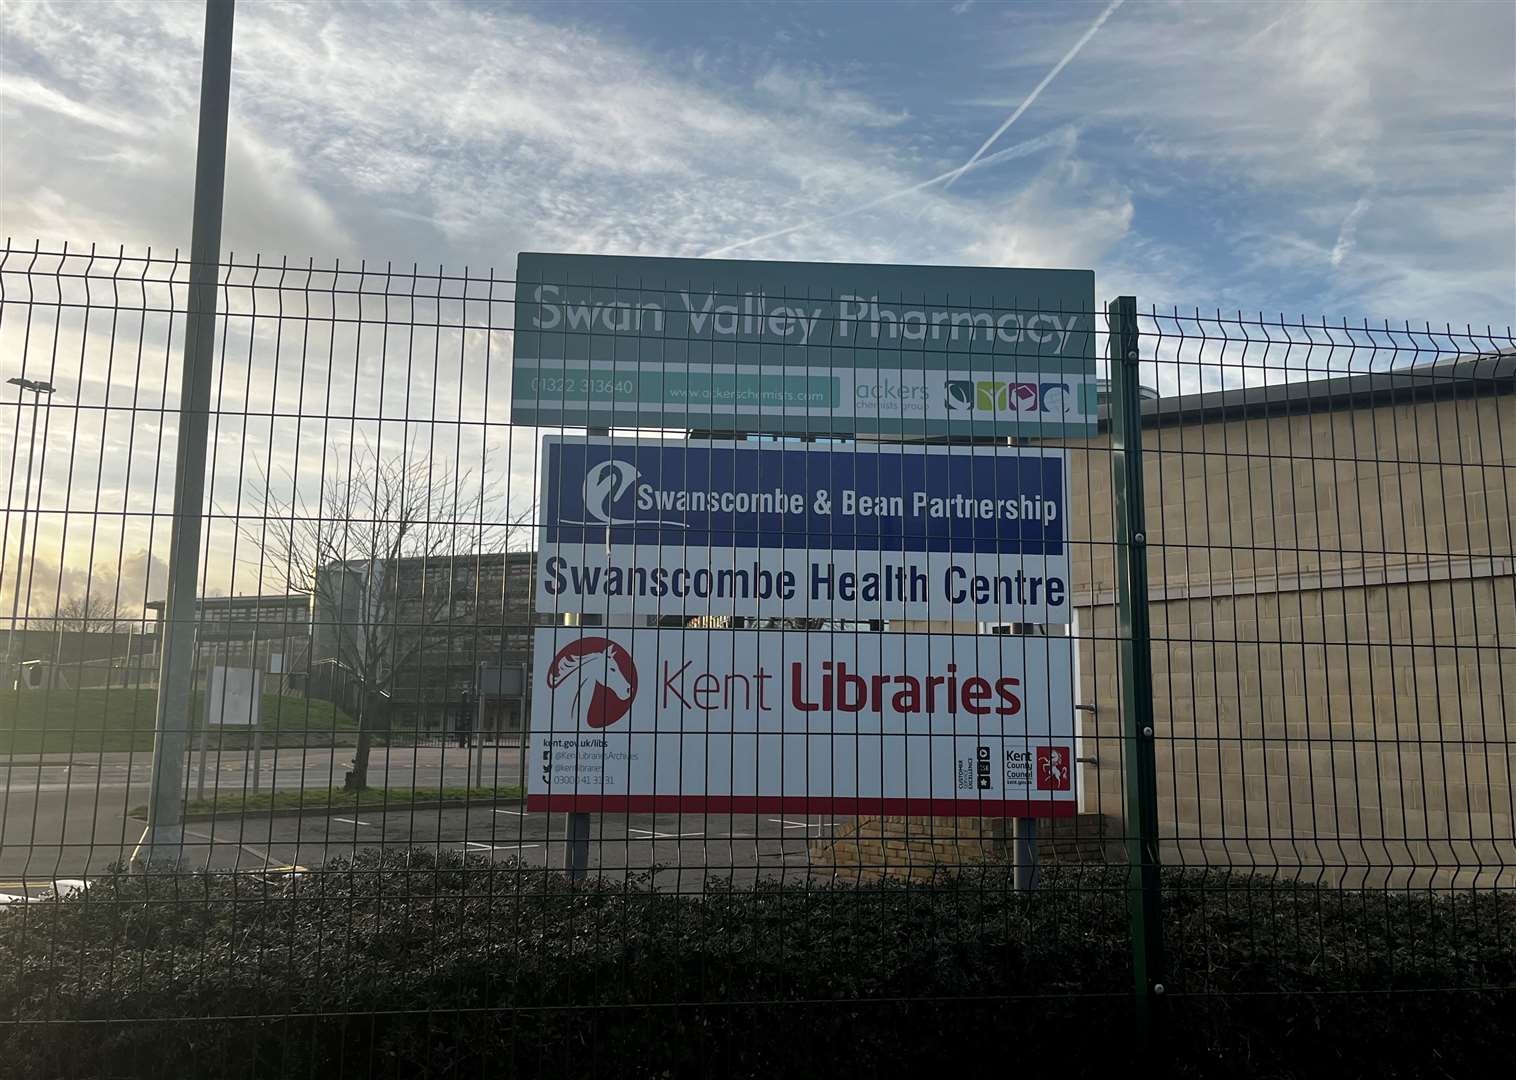 Ebbsfleet Academy grounds includes Swan Valley Pharmacy, Swanscombe Health Centre and Swanscombe library